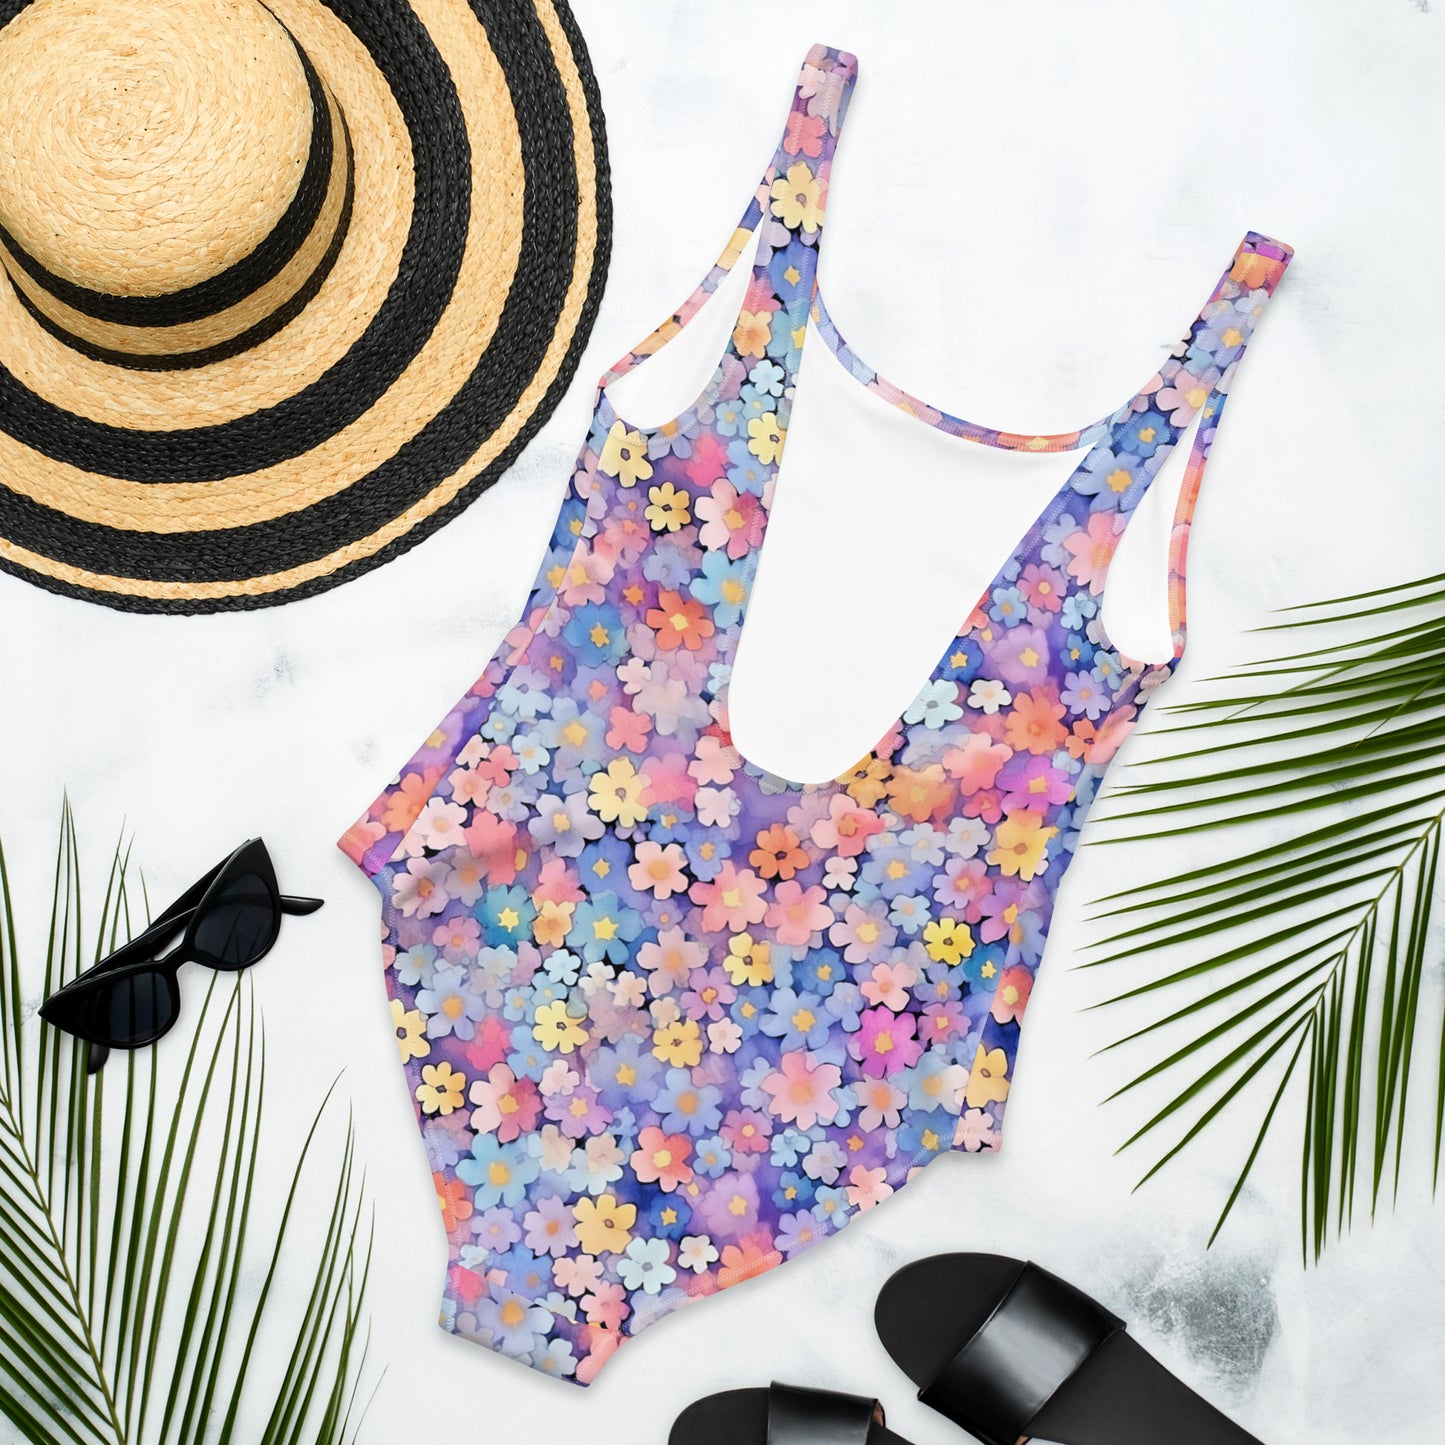 Pastel Watercolor Daisy One-Piece Swimsuit